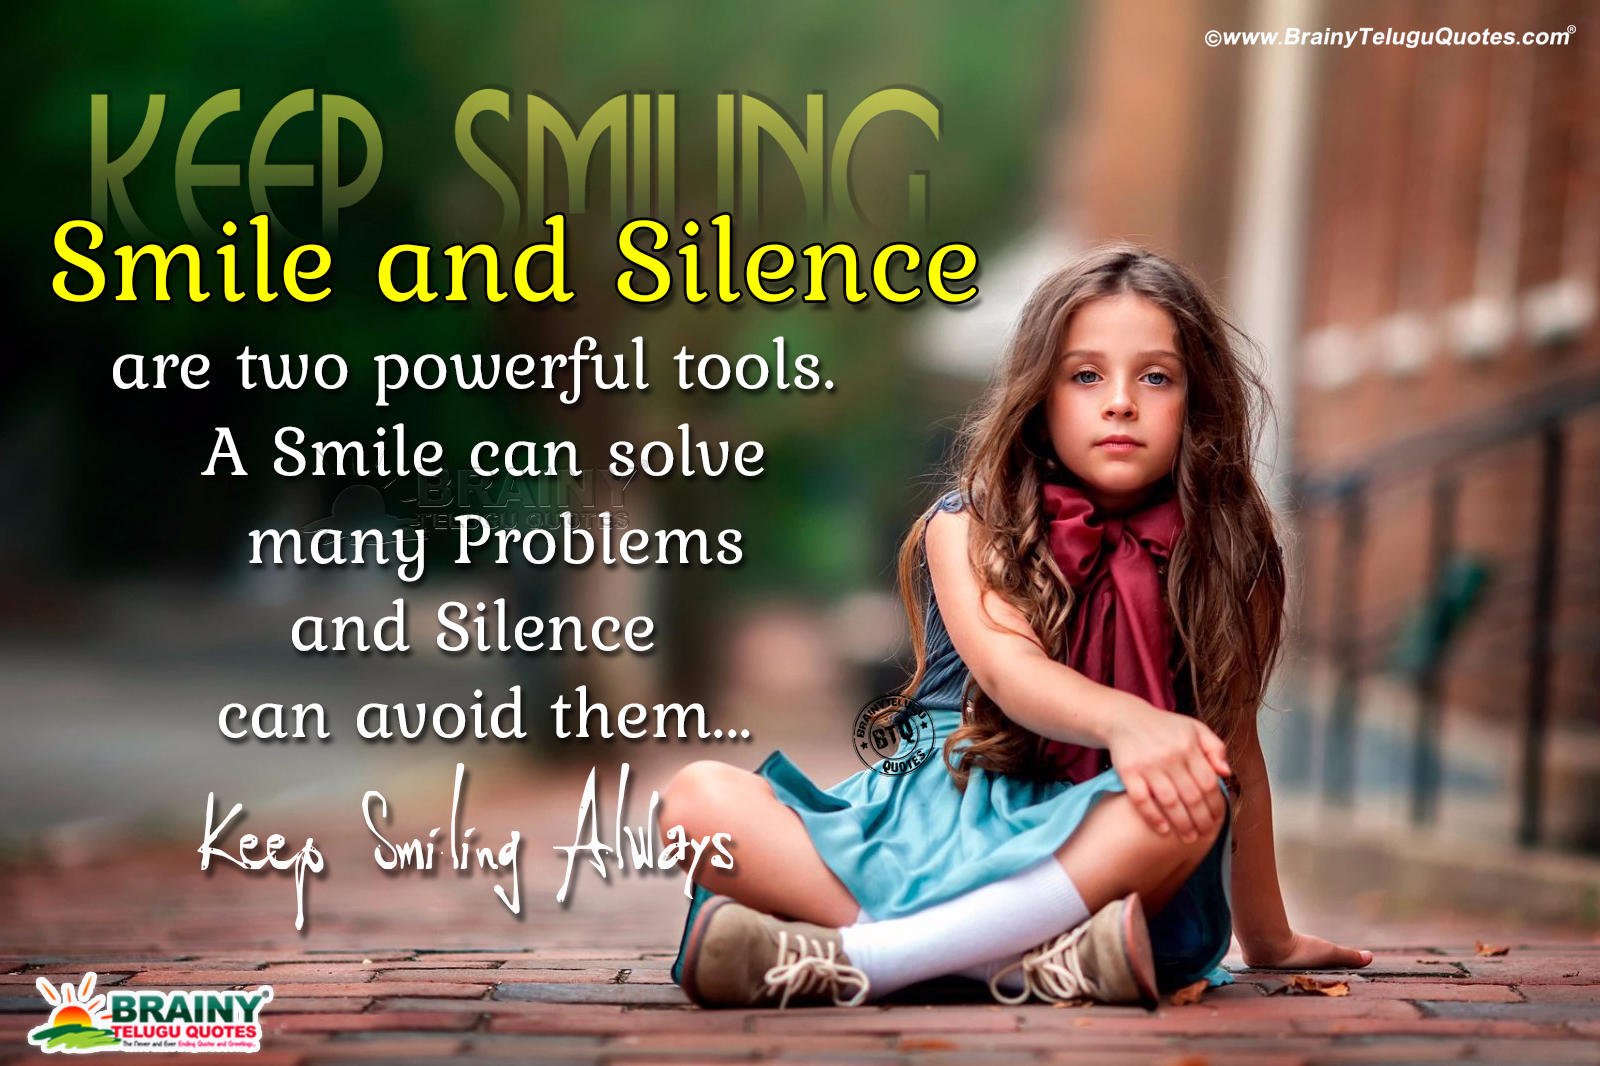 Single Quotes For Girls In English : Keep Smiling Always-Smile is Powerful ...